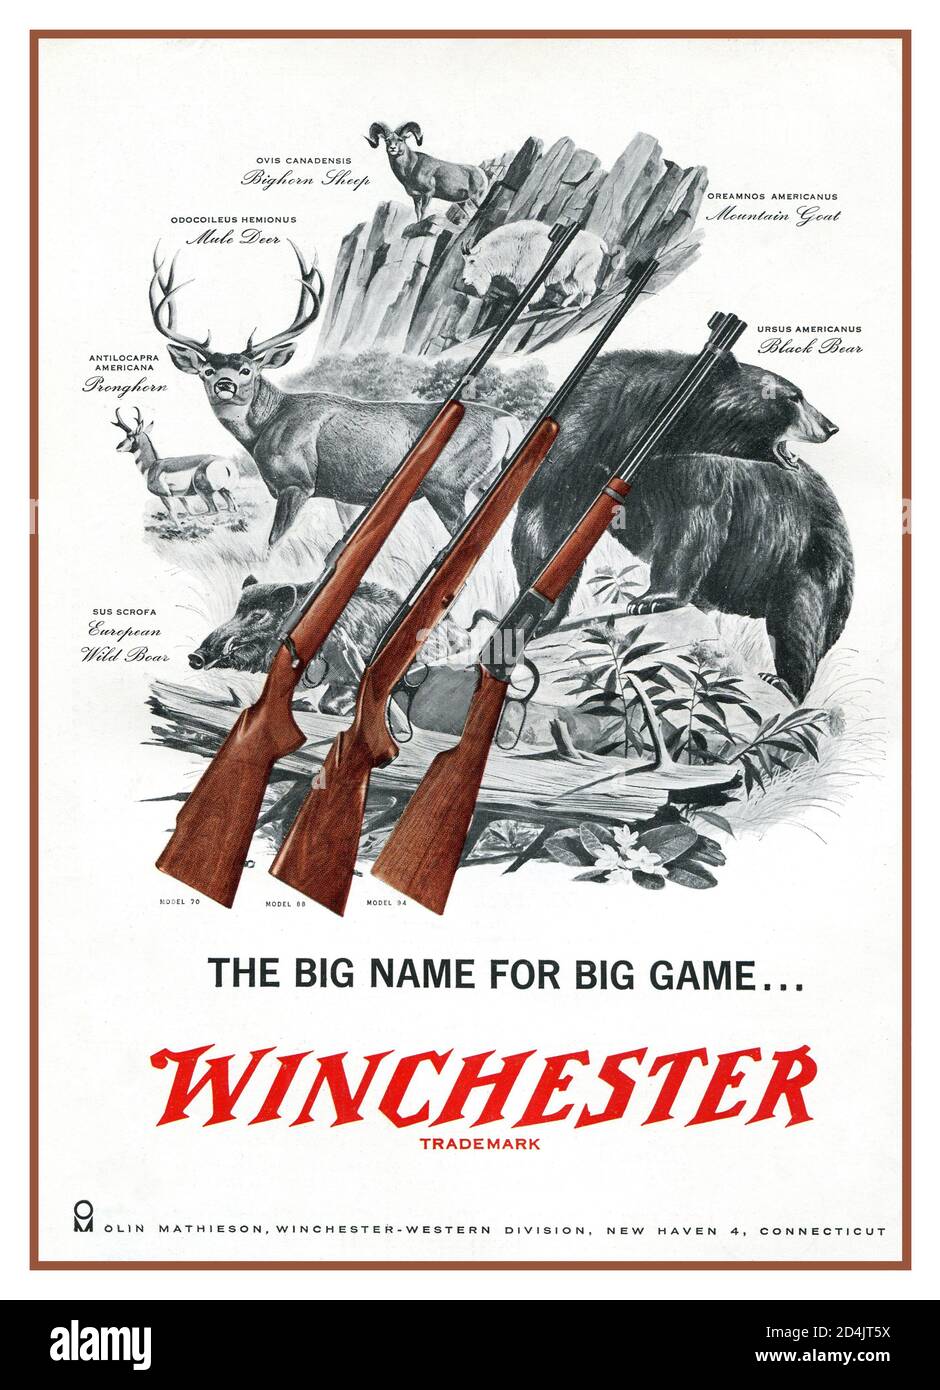 1950's American Guns Advertisement poster promoting big game shooting Winchester Rifle Advertisement 'The Big Name for Big Game' USA Stock Photo